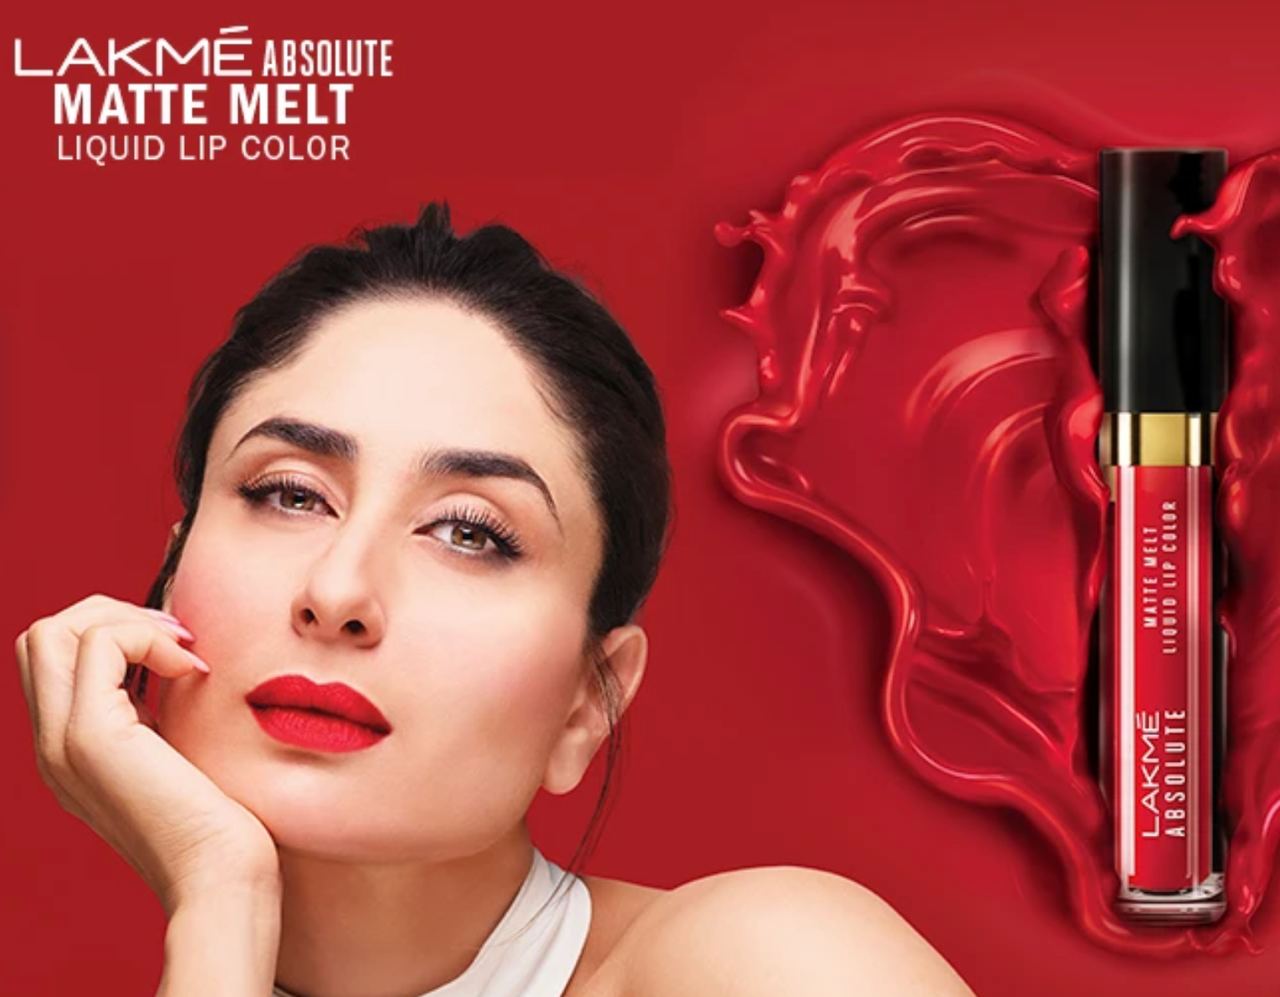 Lakme Free Offers Loot - Get 6 Lakme Products Almost For FREE